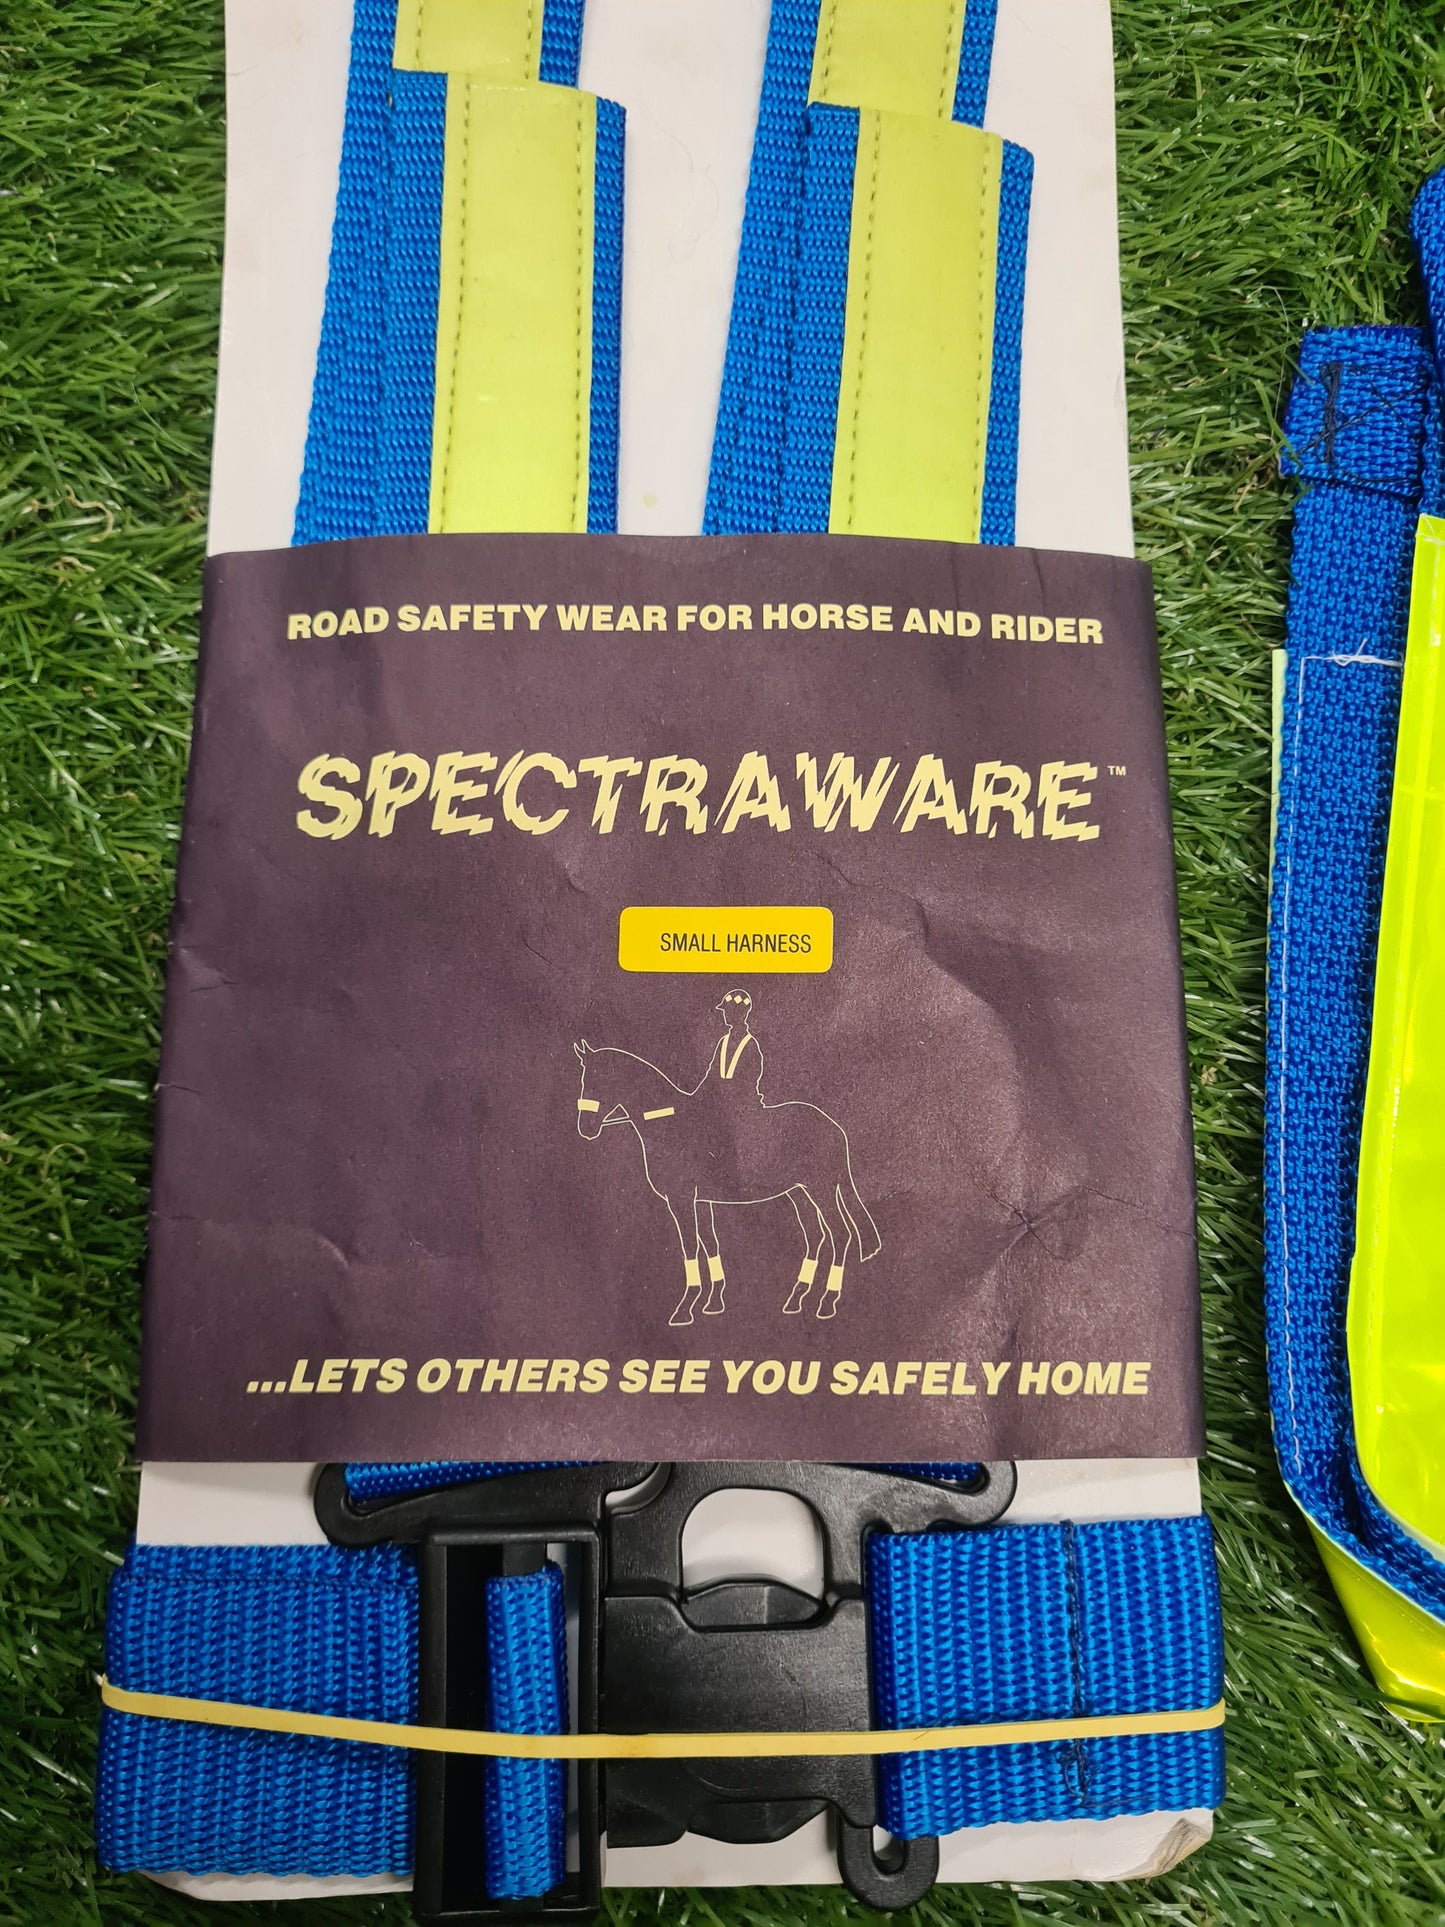 NEW spectraware reflective strap vest for rider and necklace for your horse FREE POSTAGE 🟢